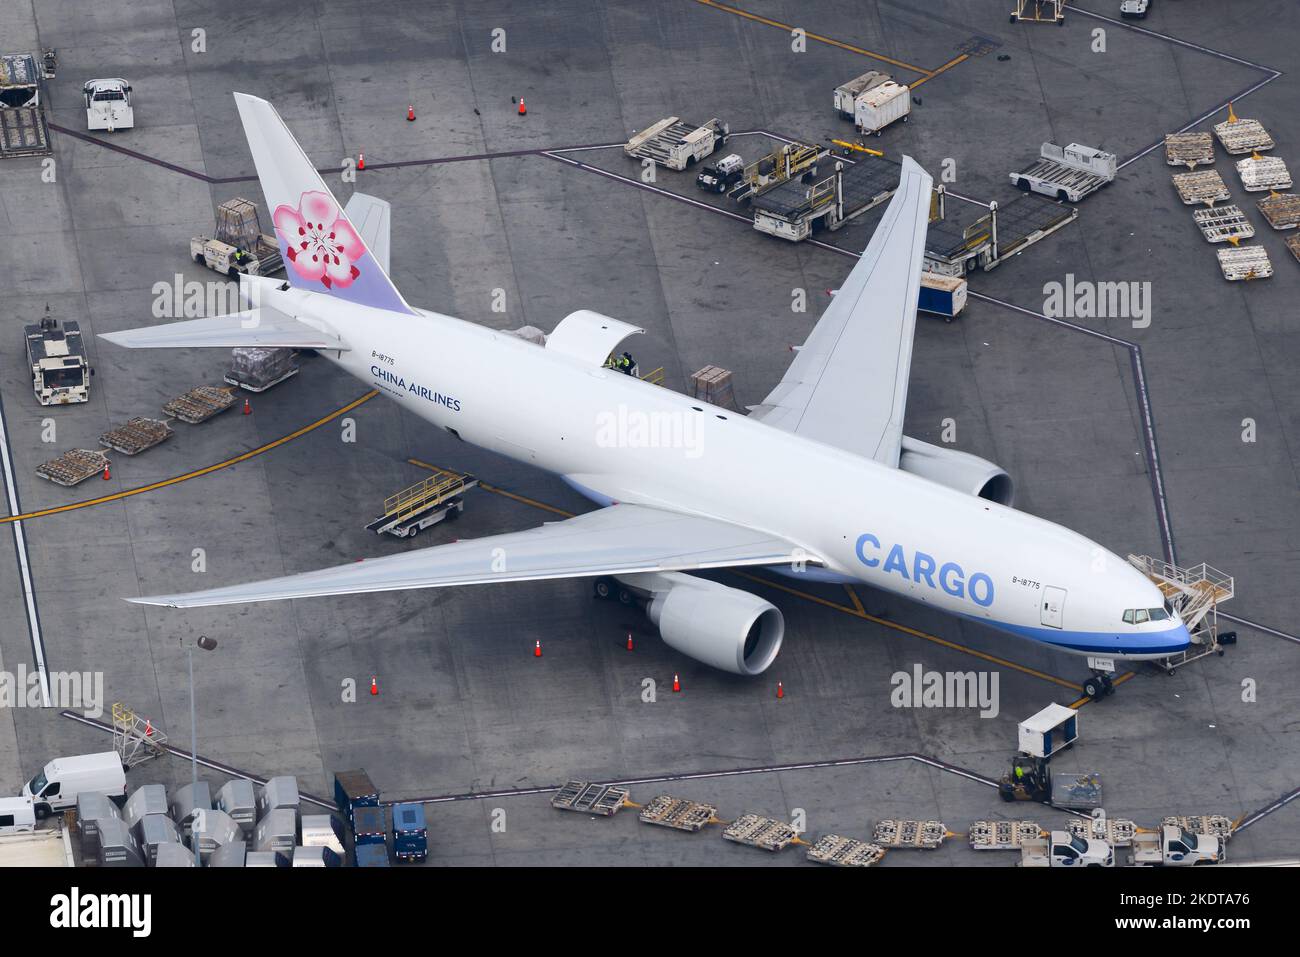 China Airlines Cargo Boeing 777 Freighter aircraft at cargo ramp. Plane of ChinaAirlines Cargo used for freight transportation. Airplane B-18775. Stock Photo